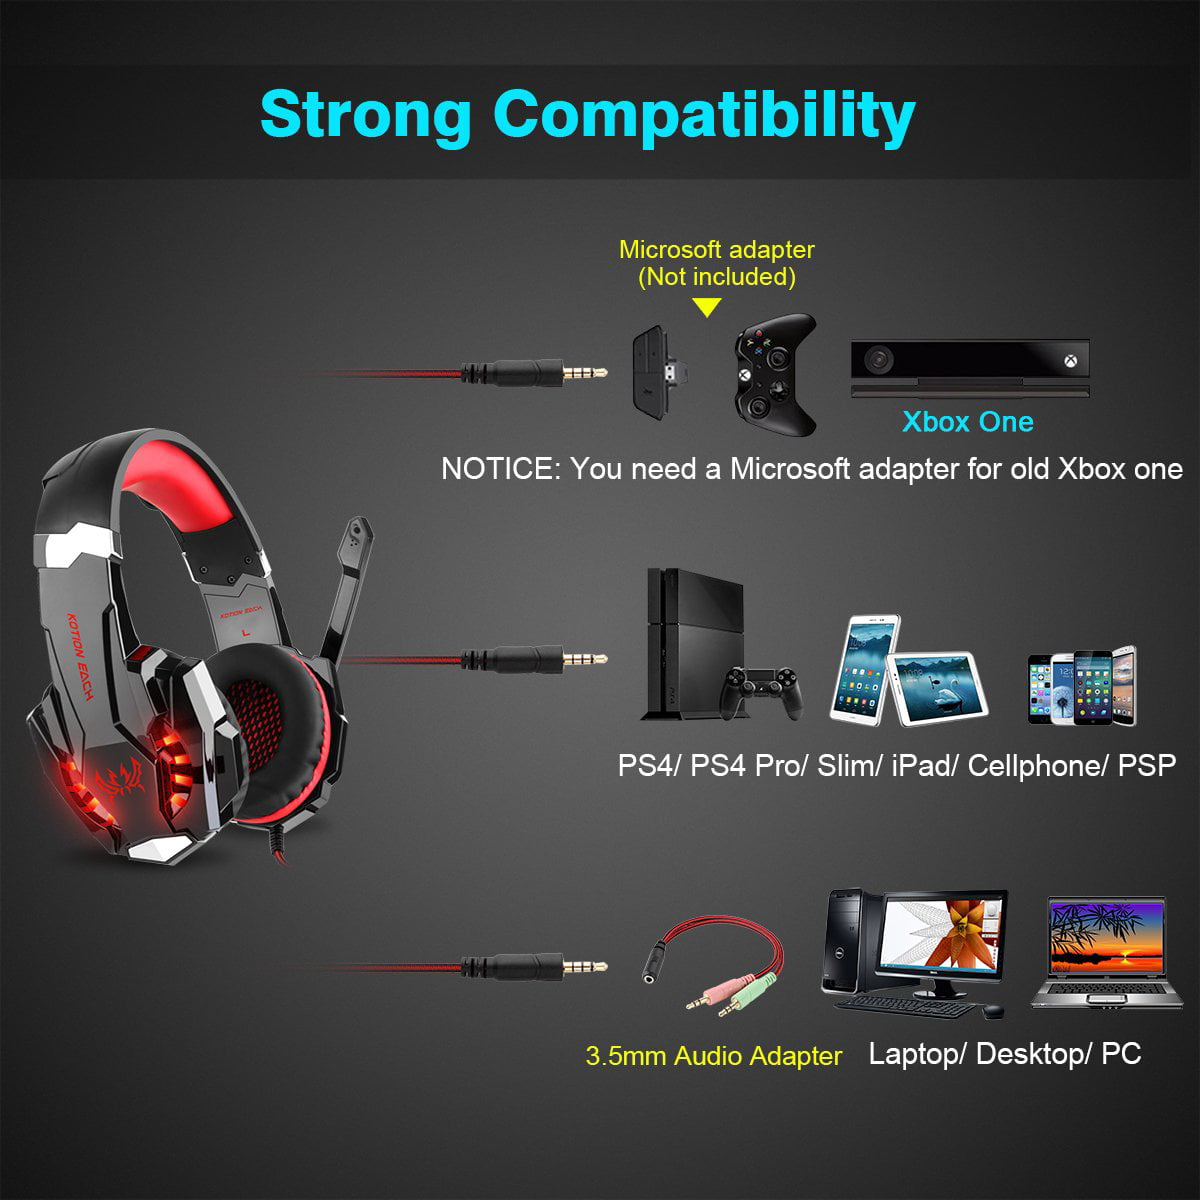 Balling Fruit groente vooroordeel DIZA100 Kotion Each G9000 Gaming Headset Headphone 3.5mm Stereo Jack with  Mic LED Light for New Xbox One/PS4/Tablet/Laptop/Cell Phone-Black&Red -  Walmart.com